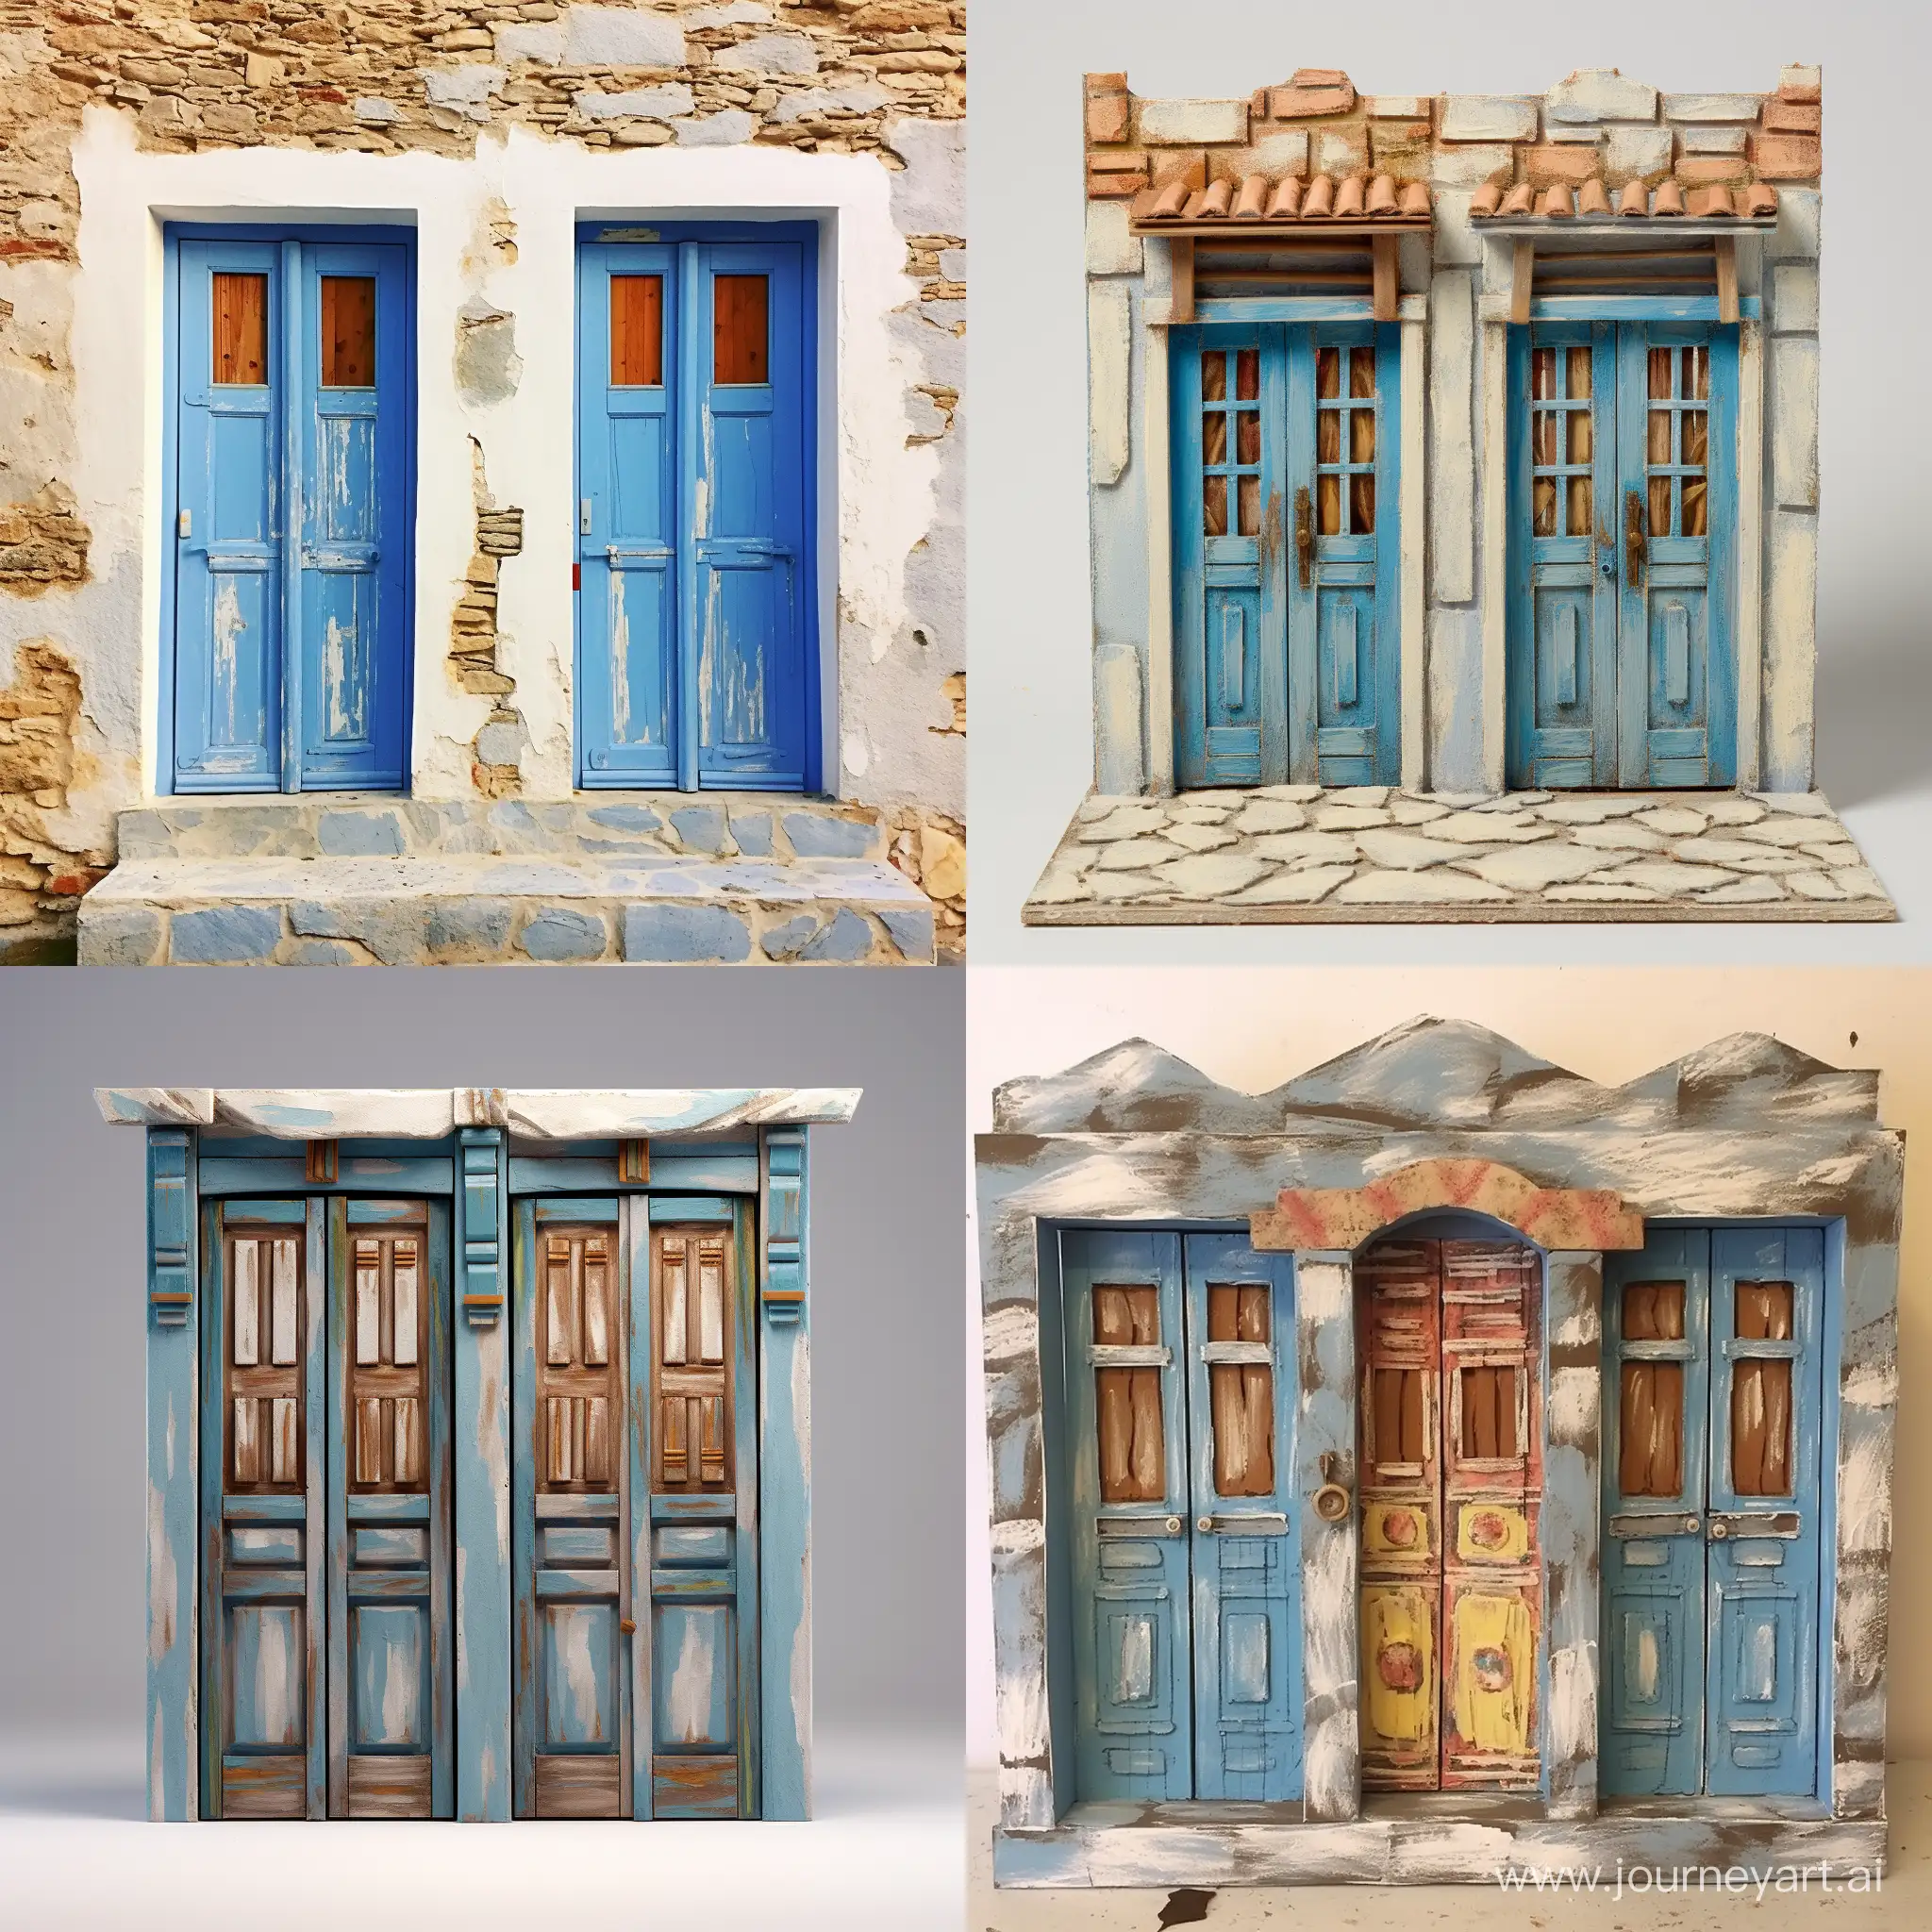 Double door made from small wood pieces that go from left to right painted light blue(greece colors) is is made from wood planks 2 cm wide each that go from left to right. Air can come through the door. The door is closed and you look from the front view. Around the doors is a wood frame that is not painted. You only see the doors nothing else they look more like they are for a clothing closet. They do not look old but not brand new they are clean